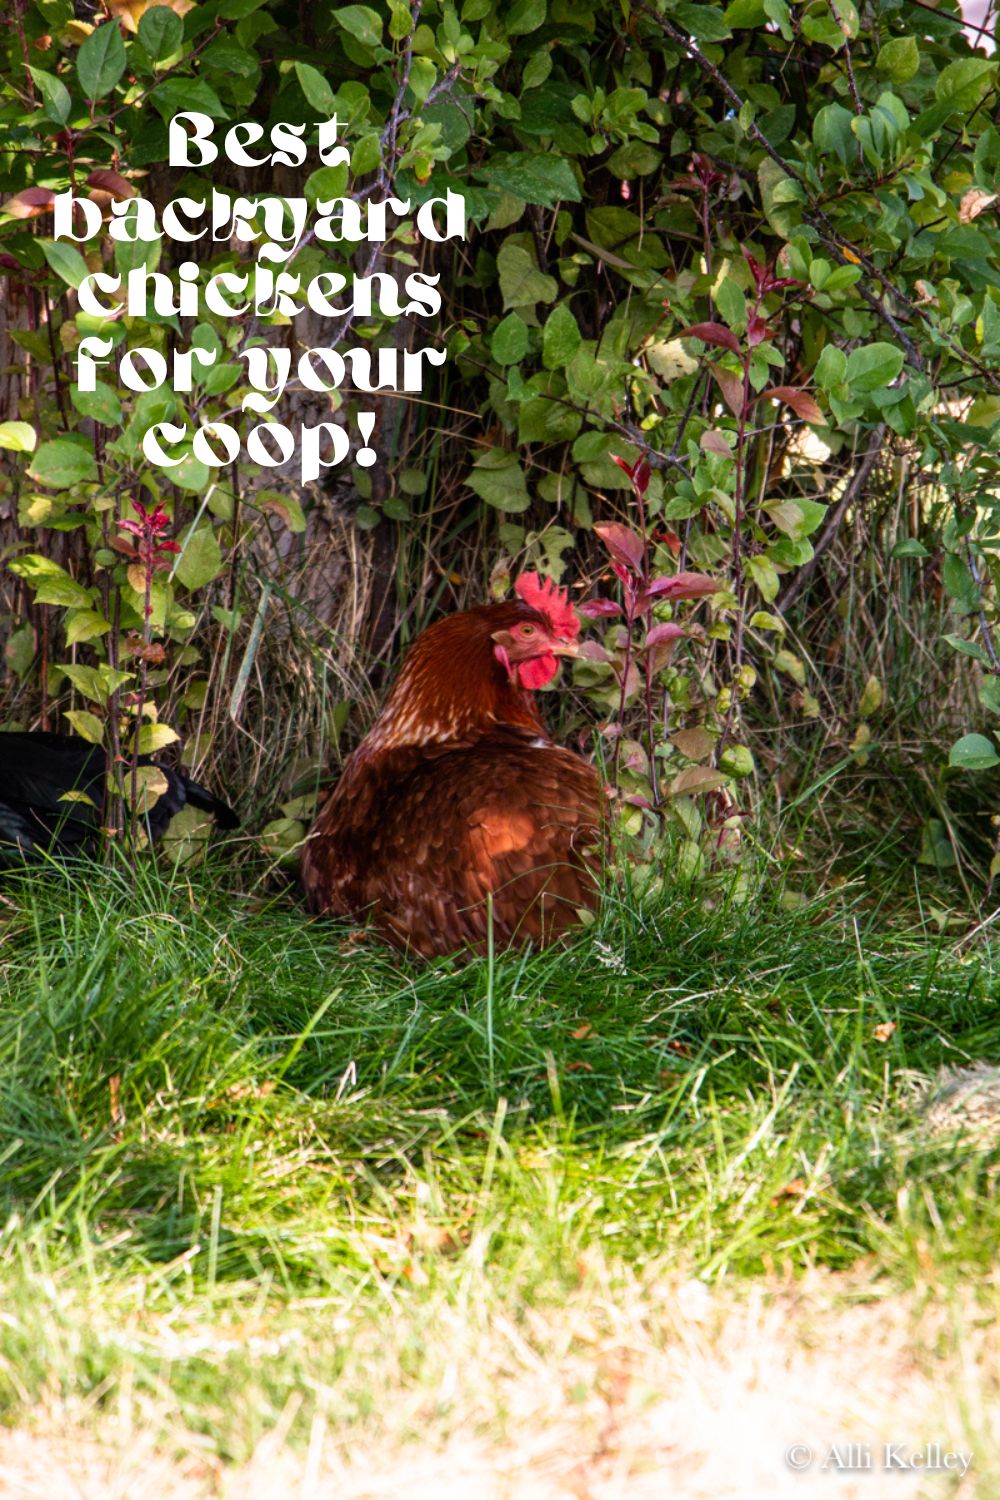 In addition to picking out the right breed or combination of breeds for your backyard chicken coop, there are a few key characteristics that make a good backyard chicken. This article will outline the characteristics of a good backyard chicken and go over different breeds and breed terminology.